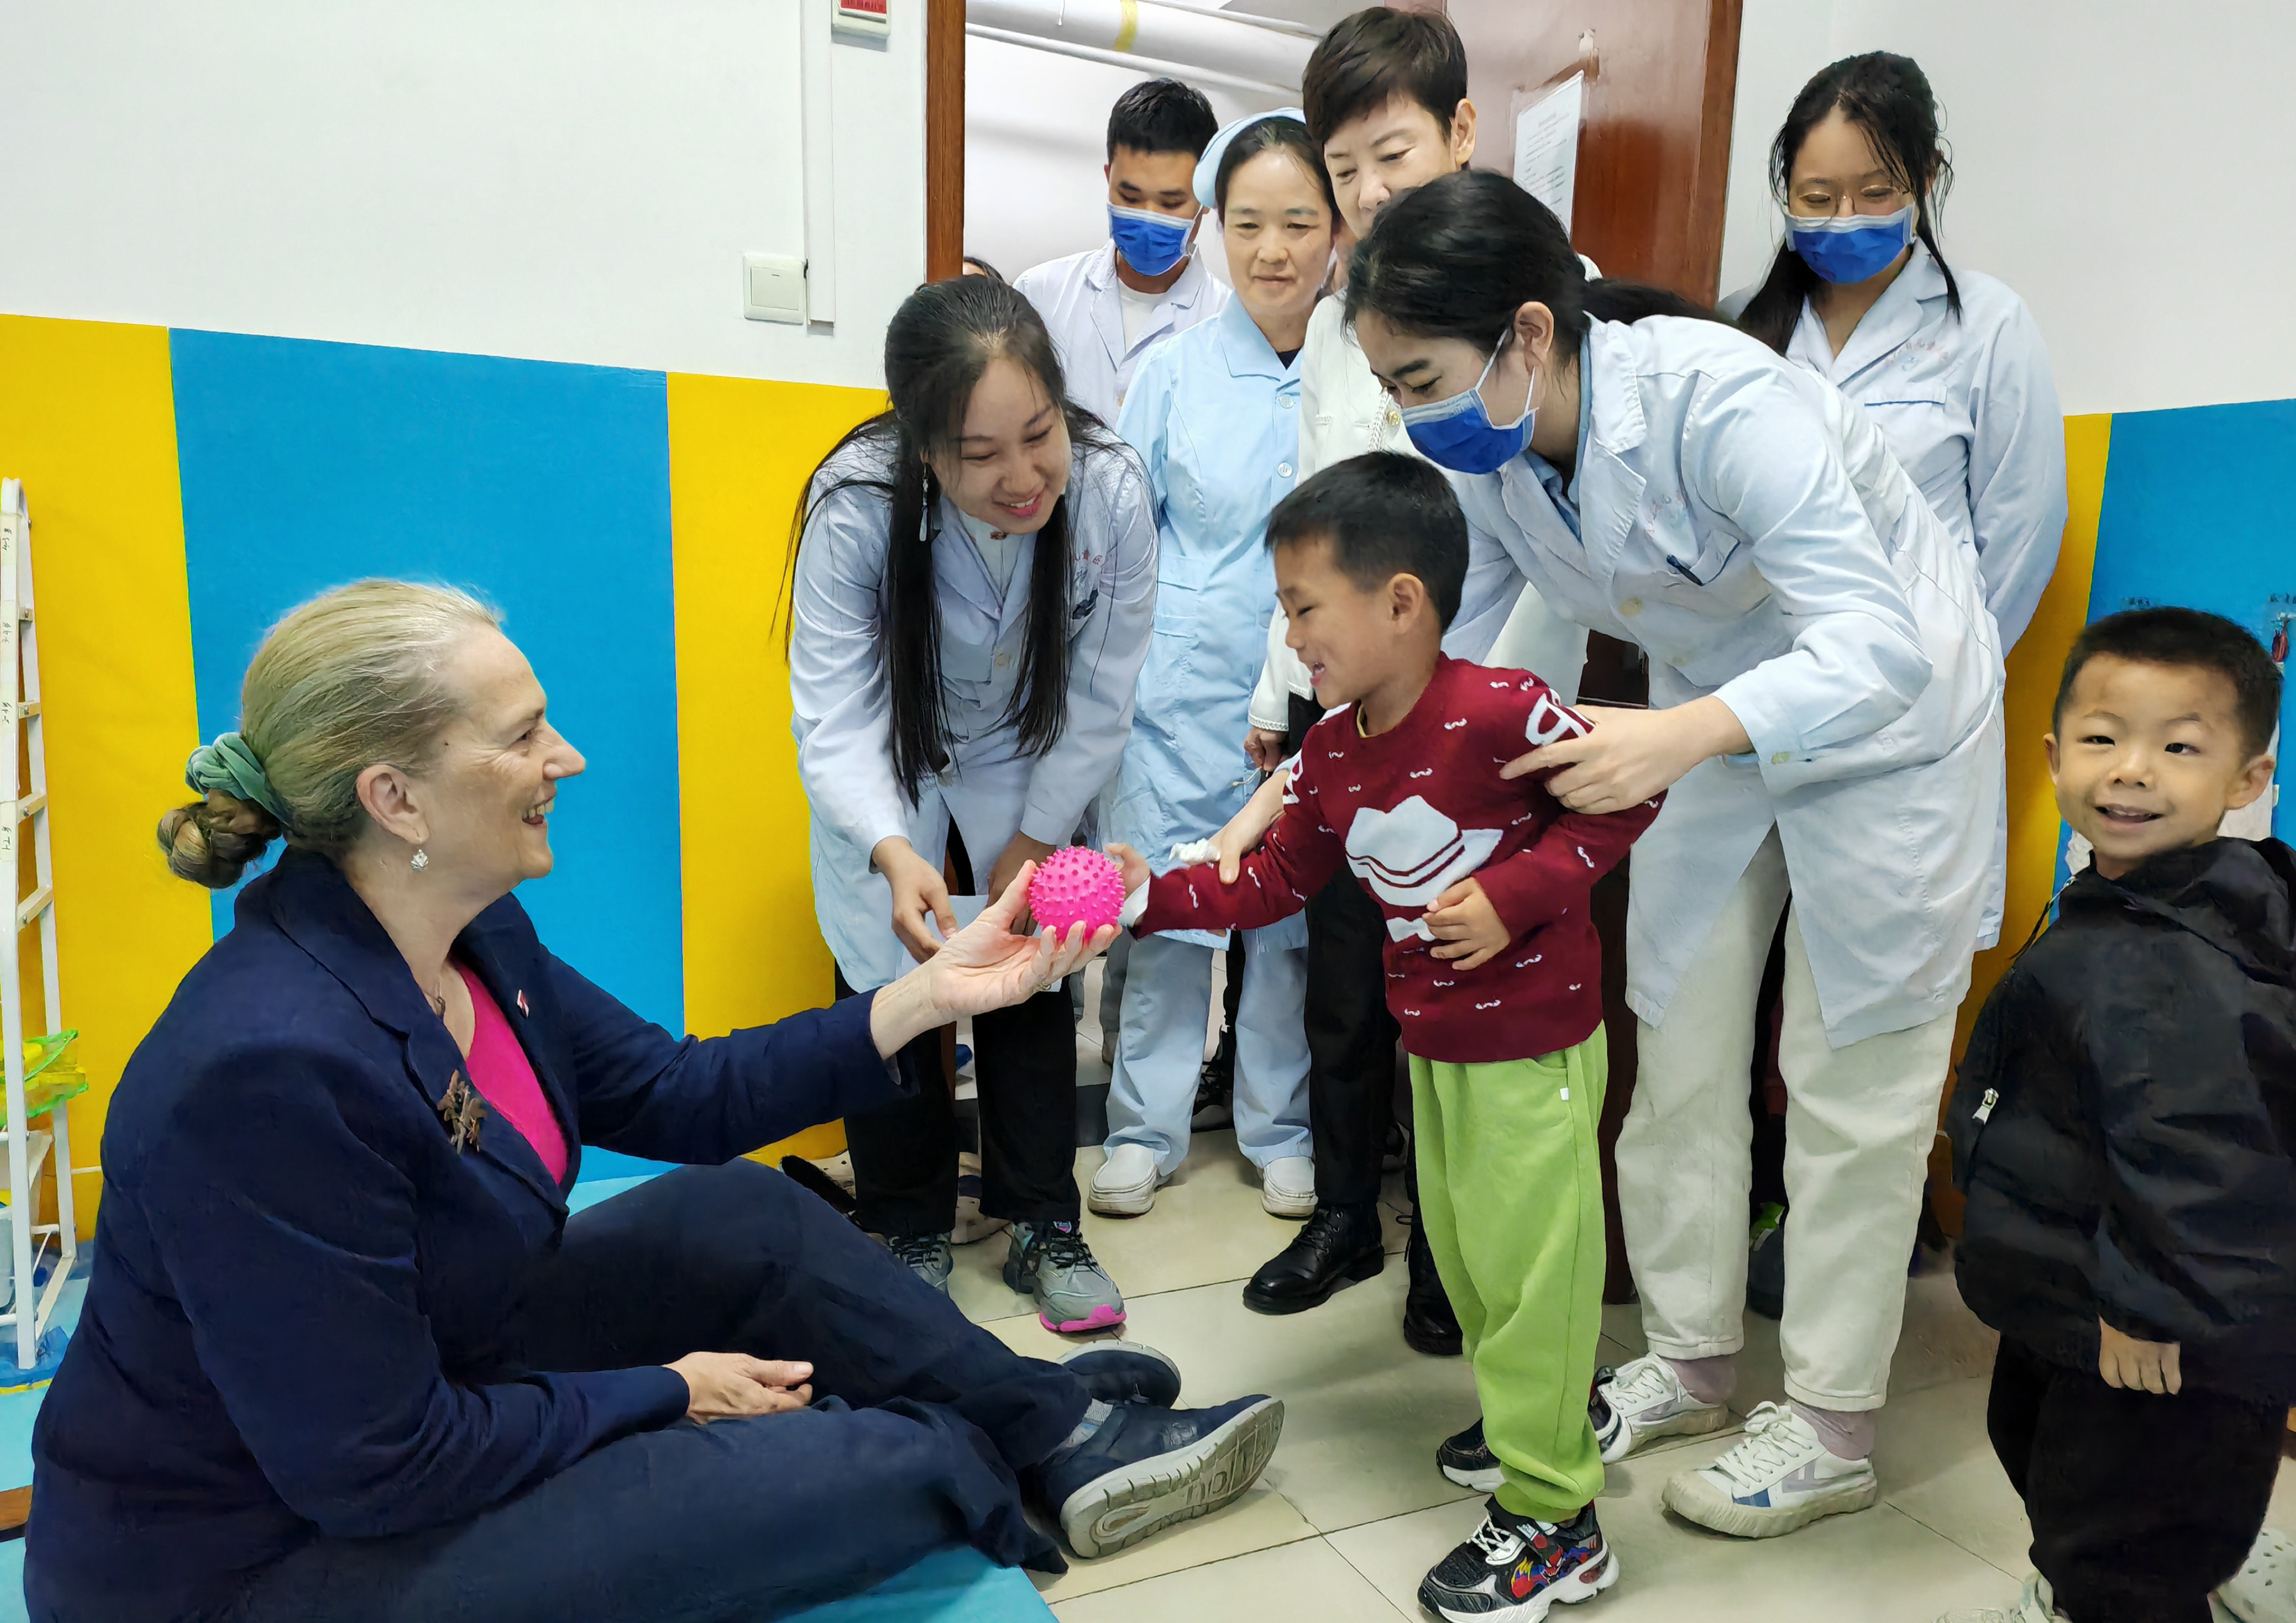 Jenny pictured holding out a therapy toy to a young child, surrounded by other medical professionals.